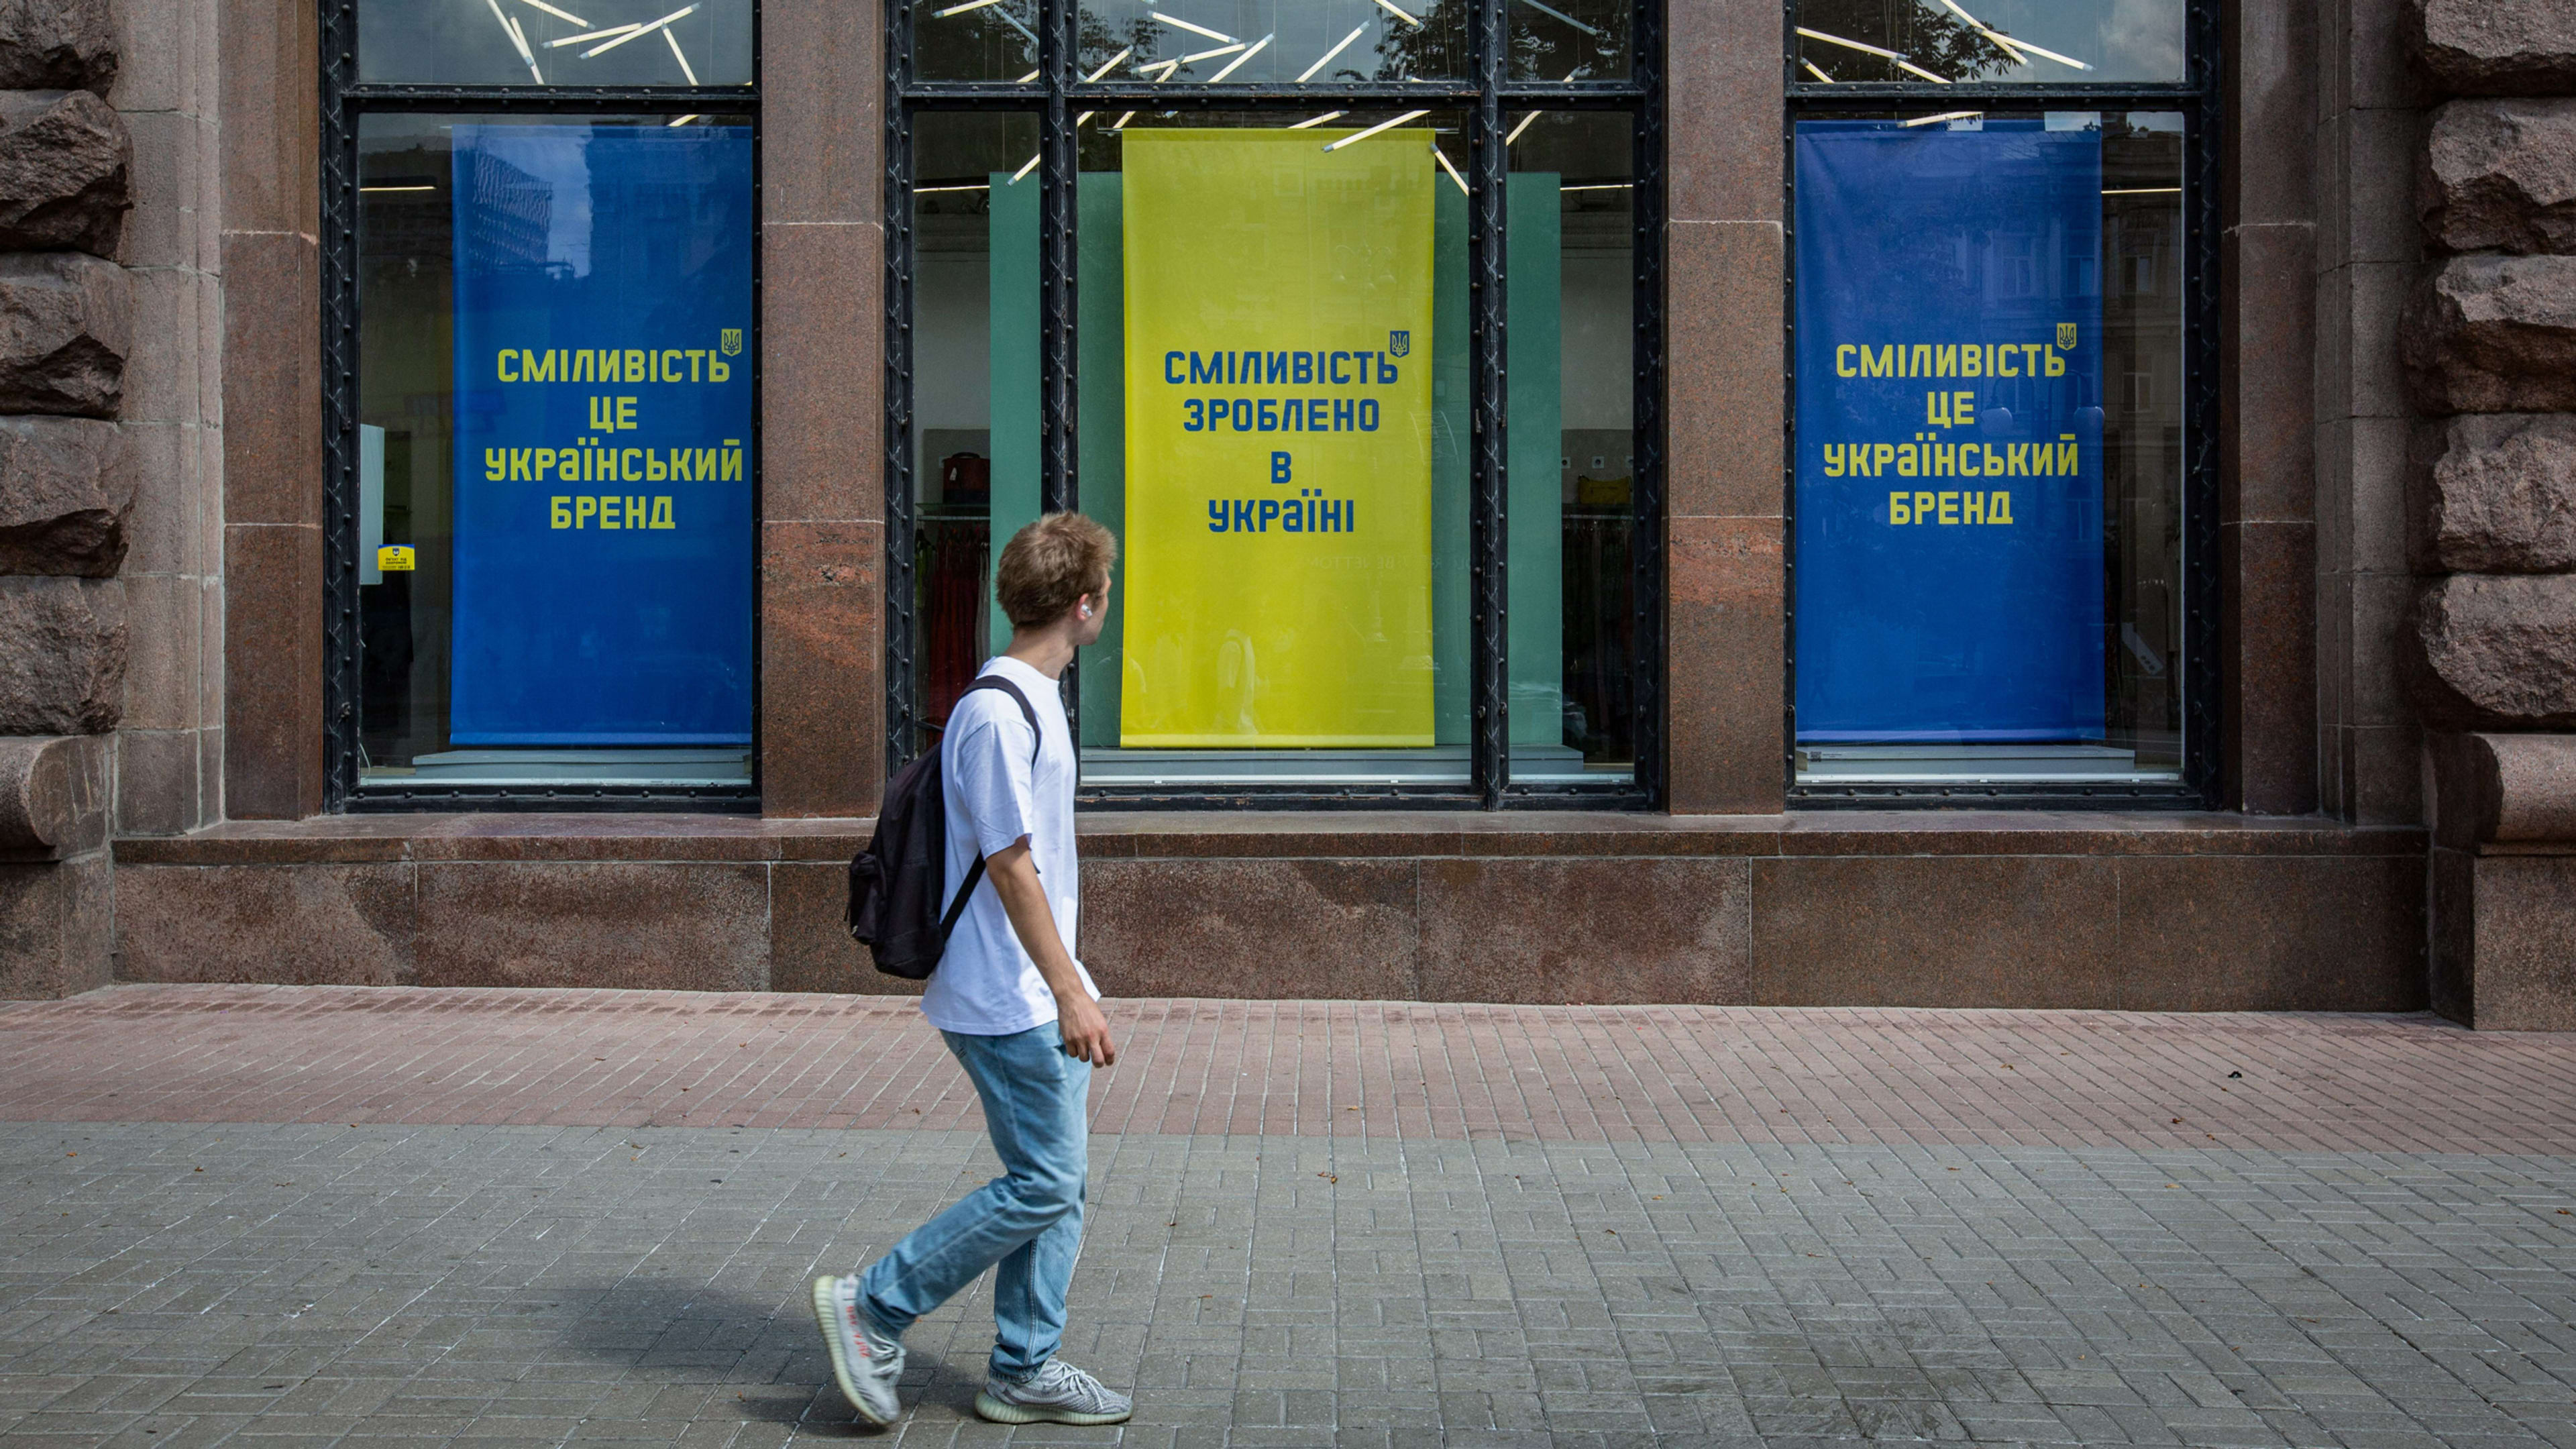 With ‘bravery’ as its new brand, Ukraine is turning advertising into a weapon